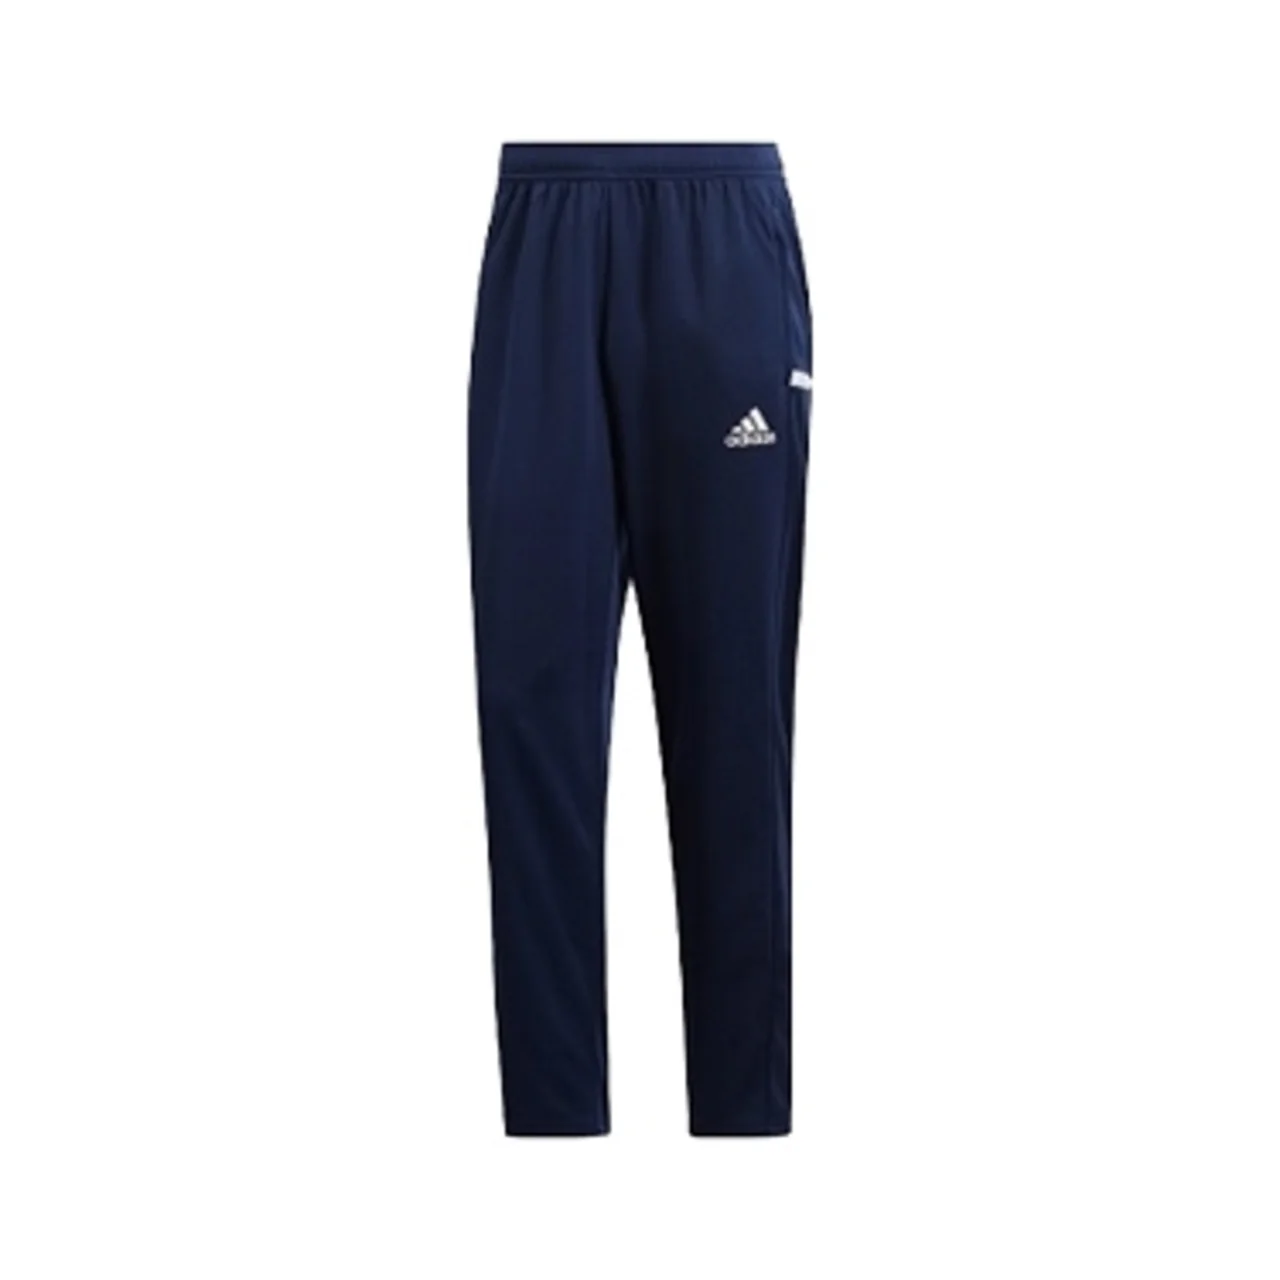 Adidas T19 Track Pant Navy Size S